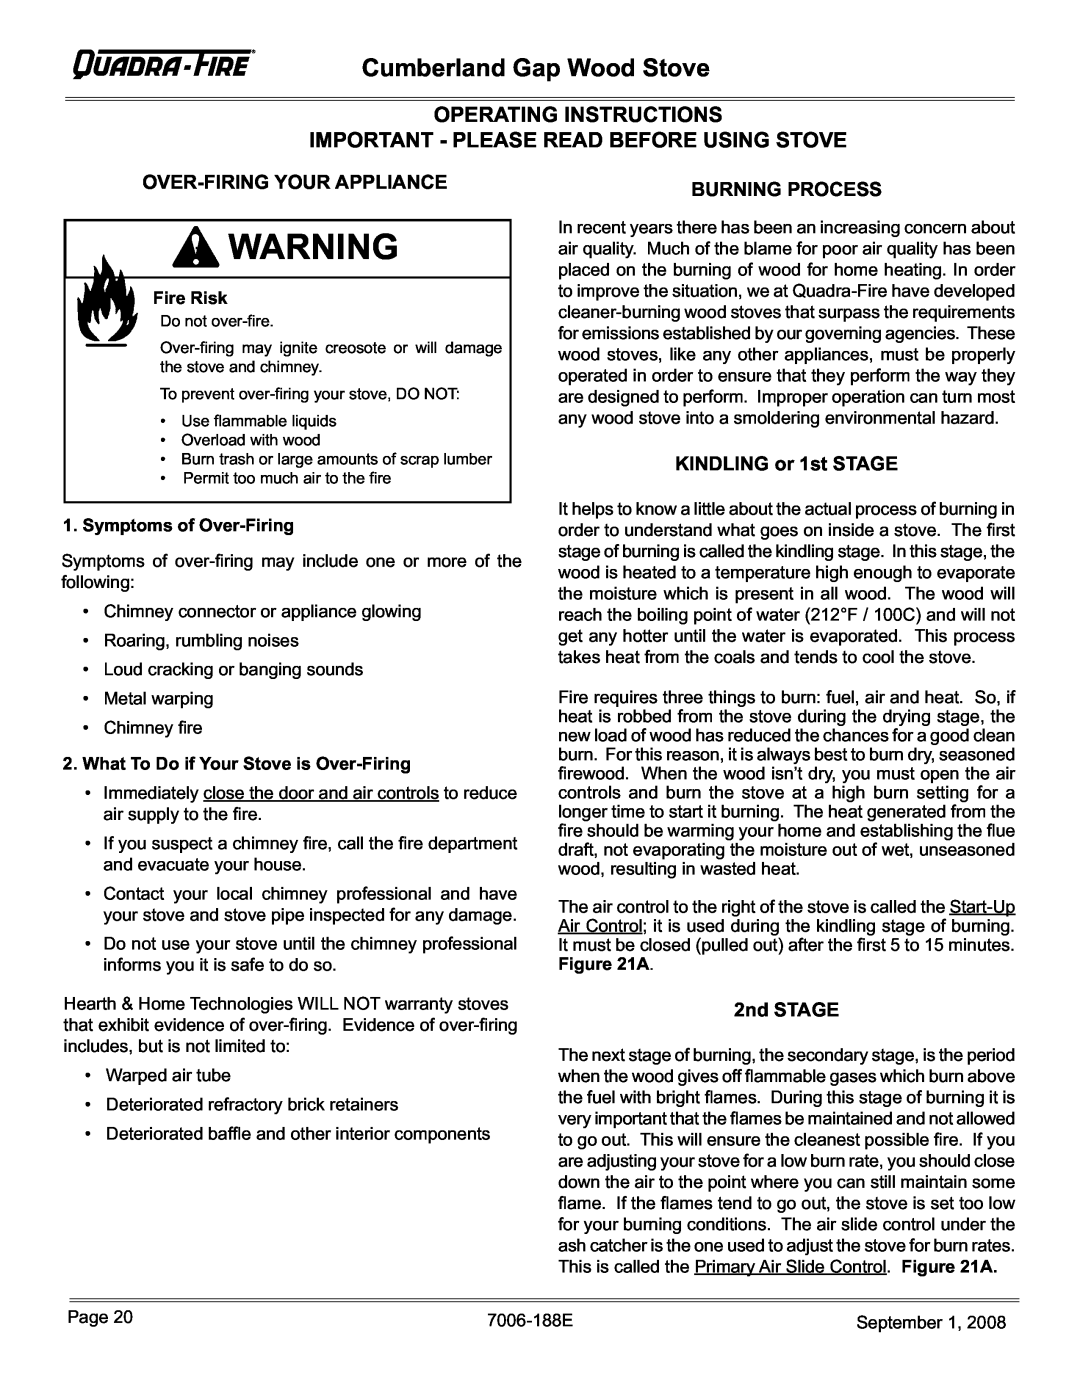 Hearth and Home Technologies CUMBGAP-MBK Operating Instructions Important - Please Read Before Using Stove, Fire Risk 